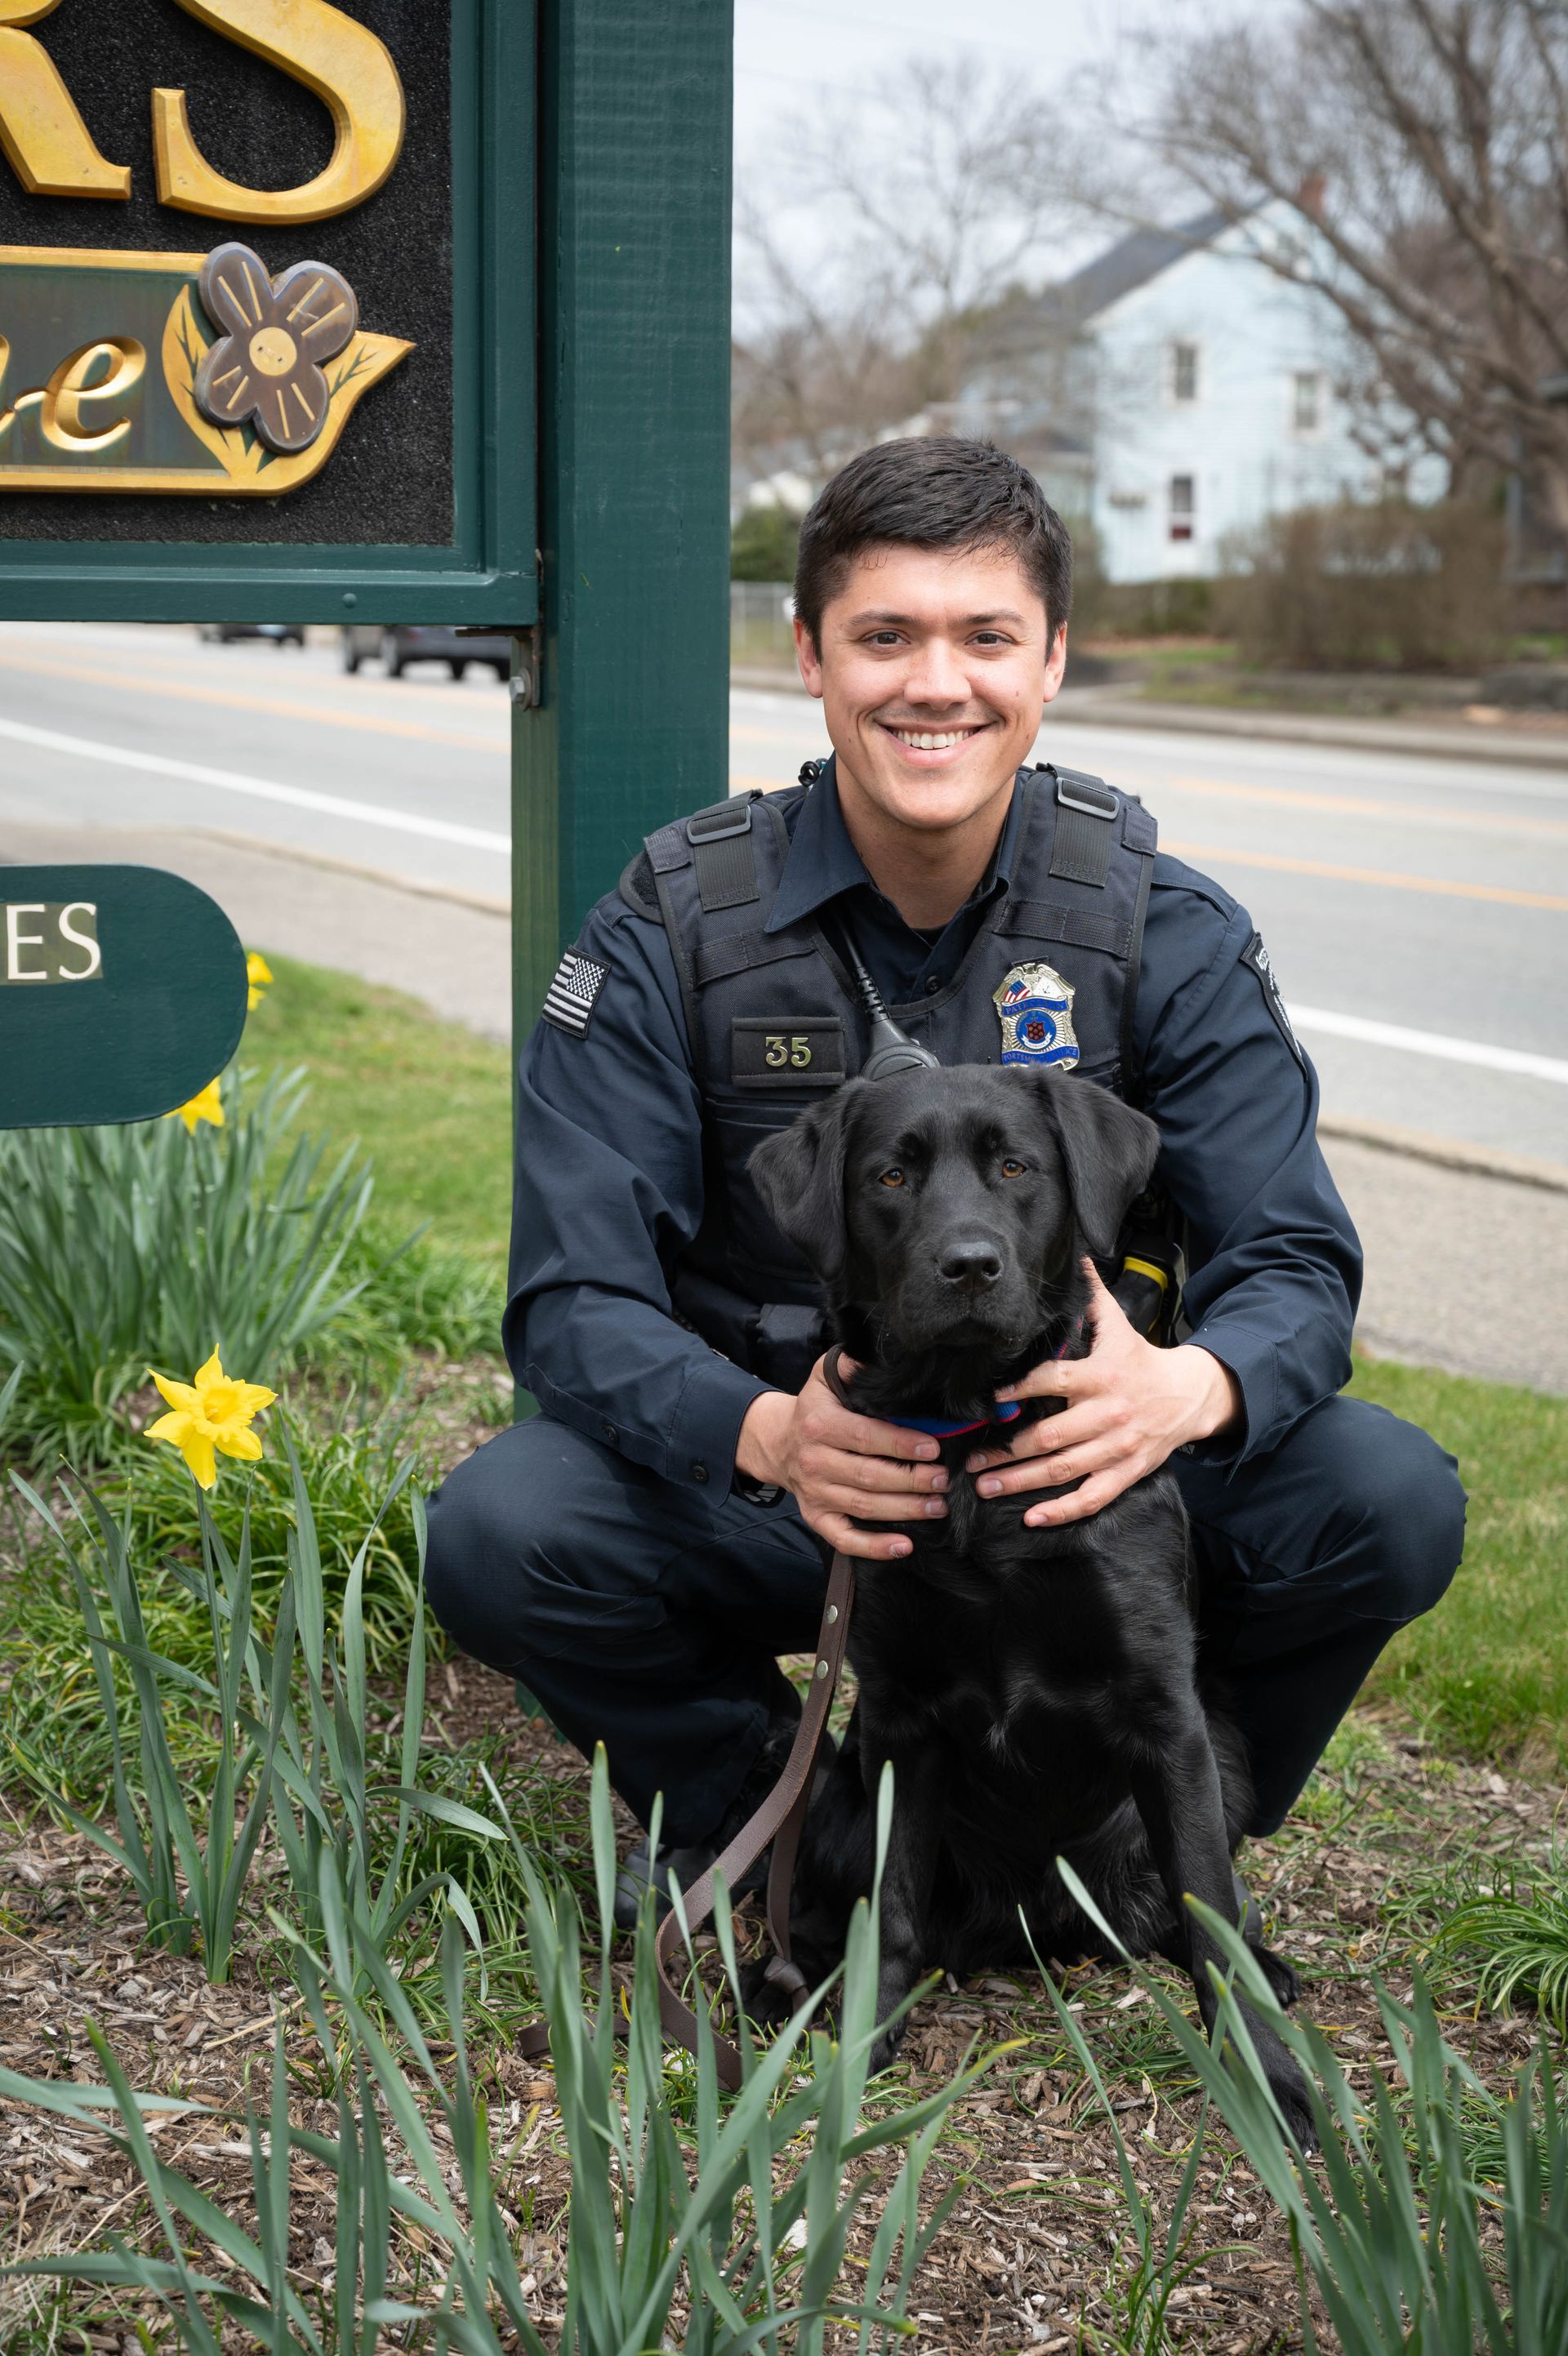 A picture of Holly, a black Labrador, and her handler Westley Lemar.